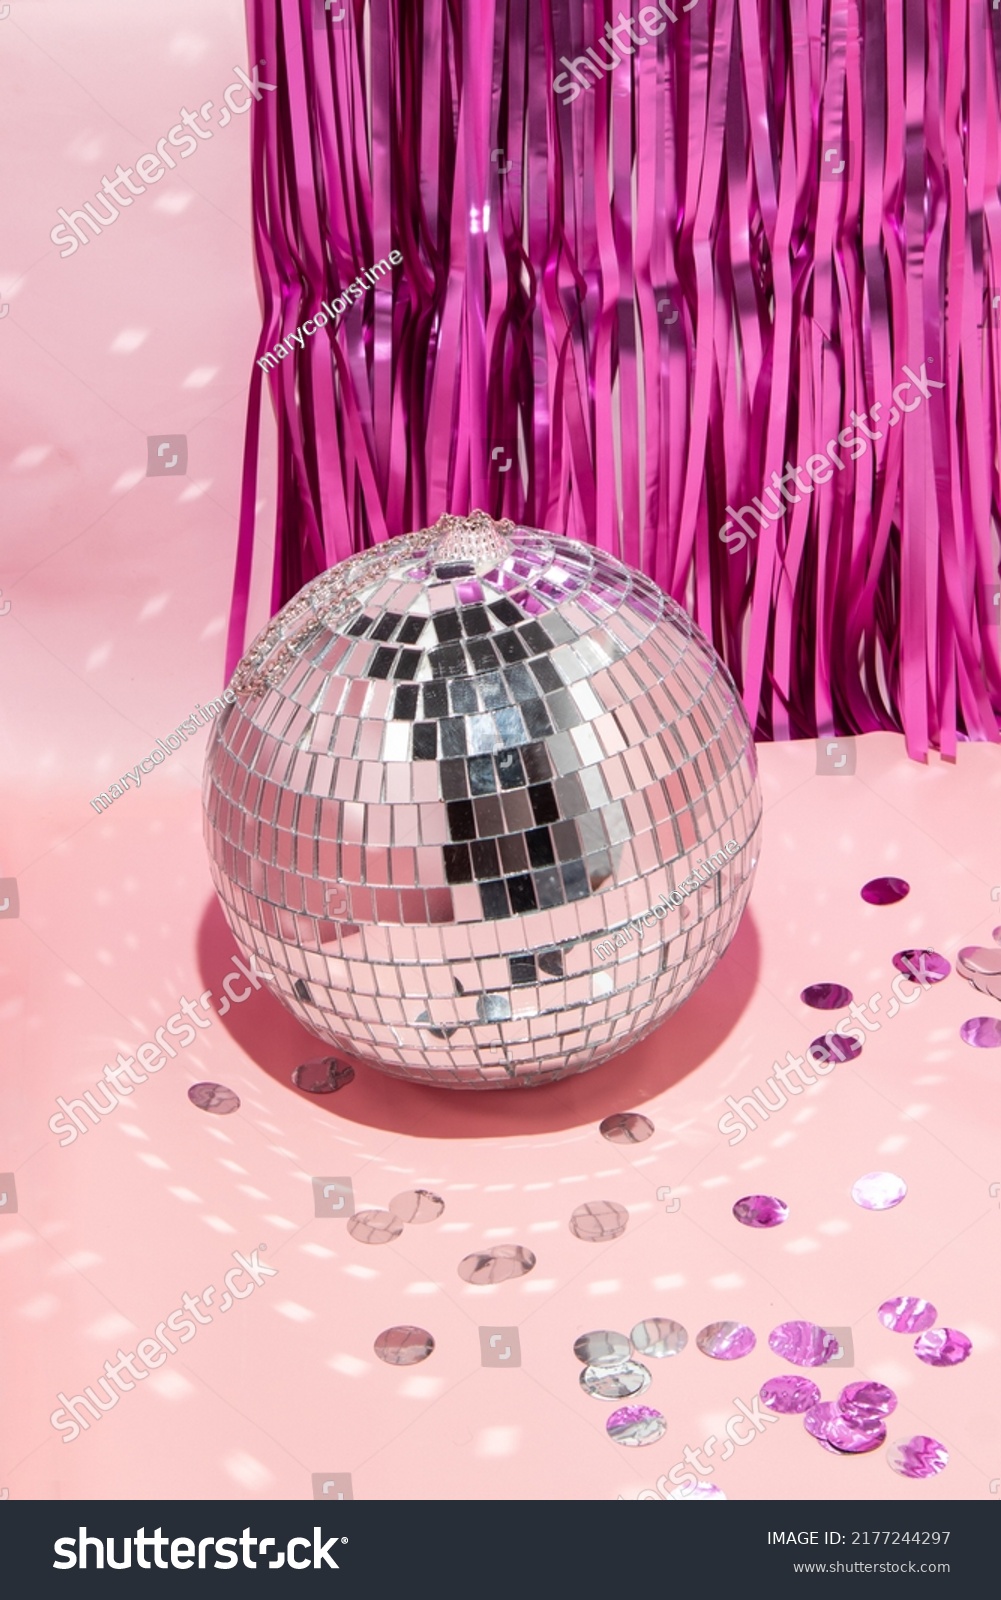 Shiny disco ball, courtain and confetti on pastel light pink background. Trendy party symbols concept. Minimalistic celebration composition. #2177244297